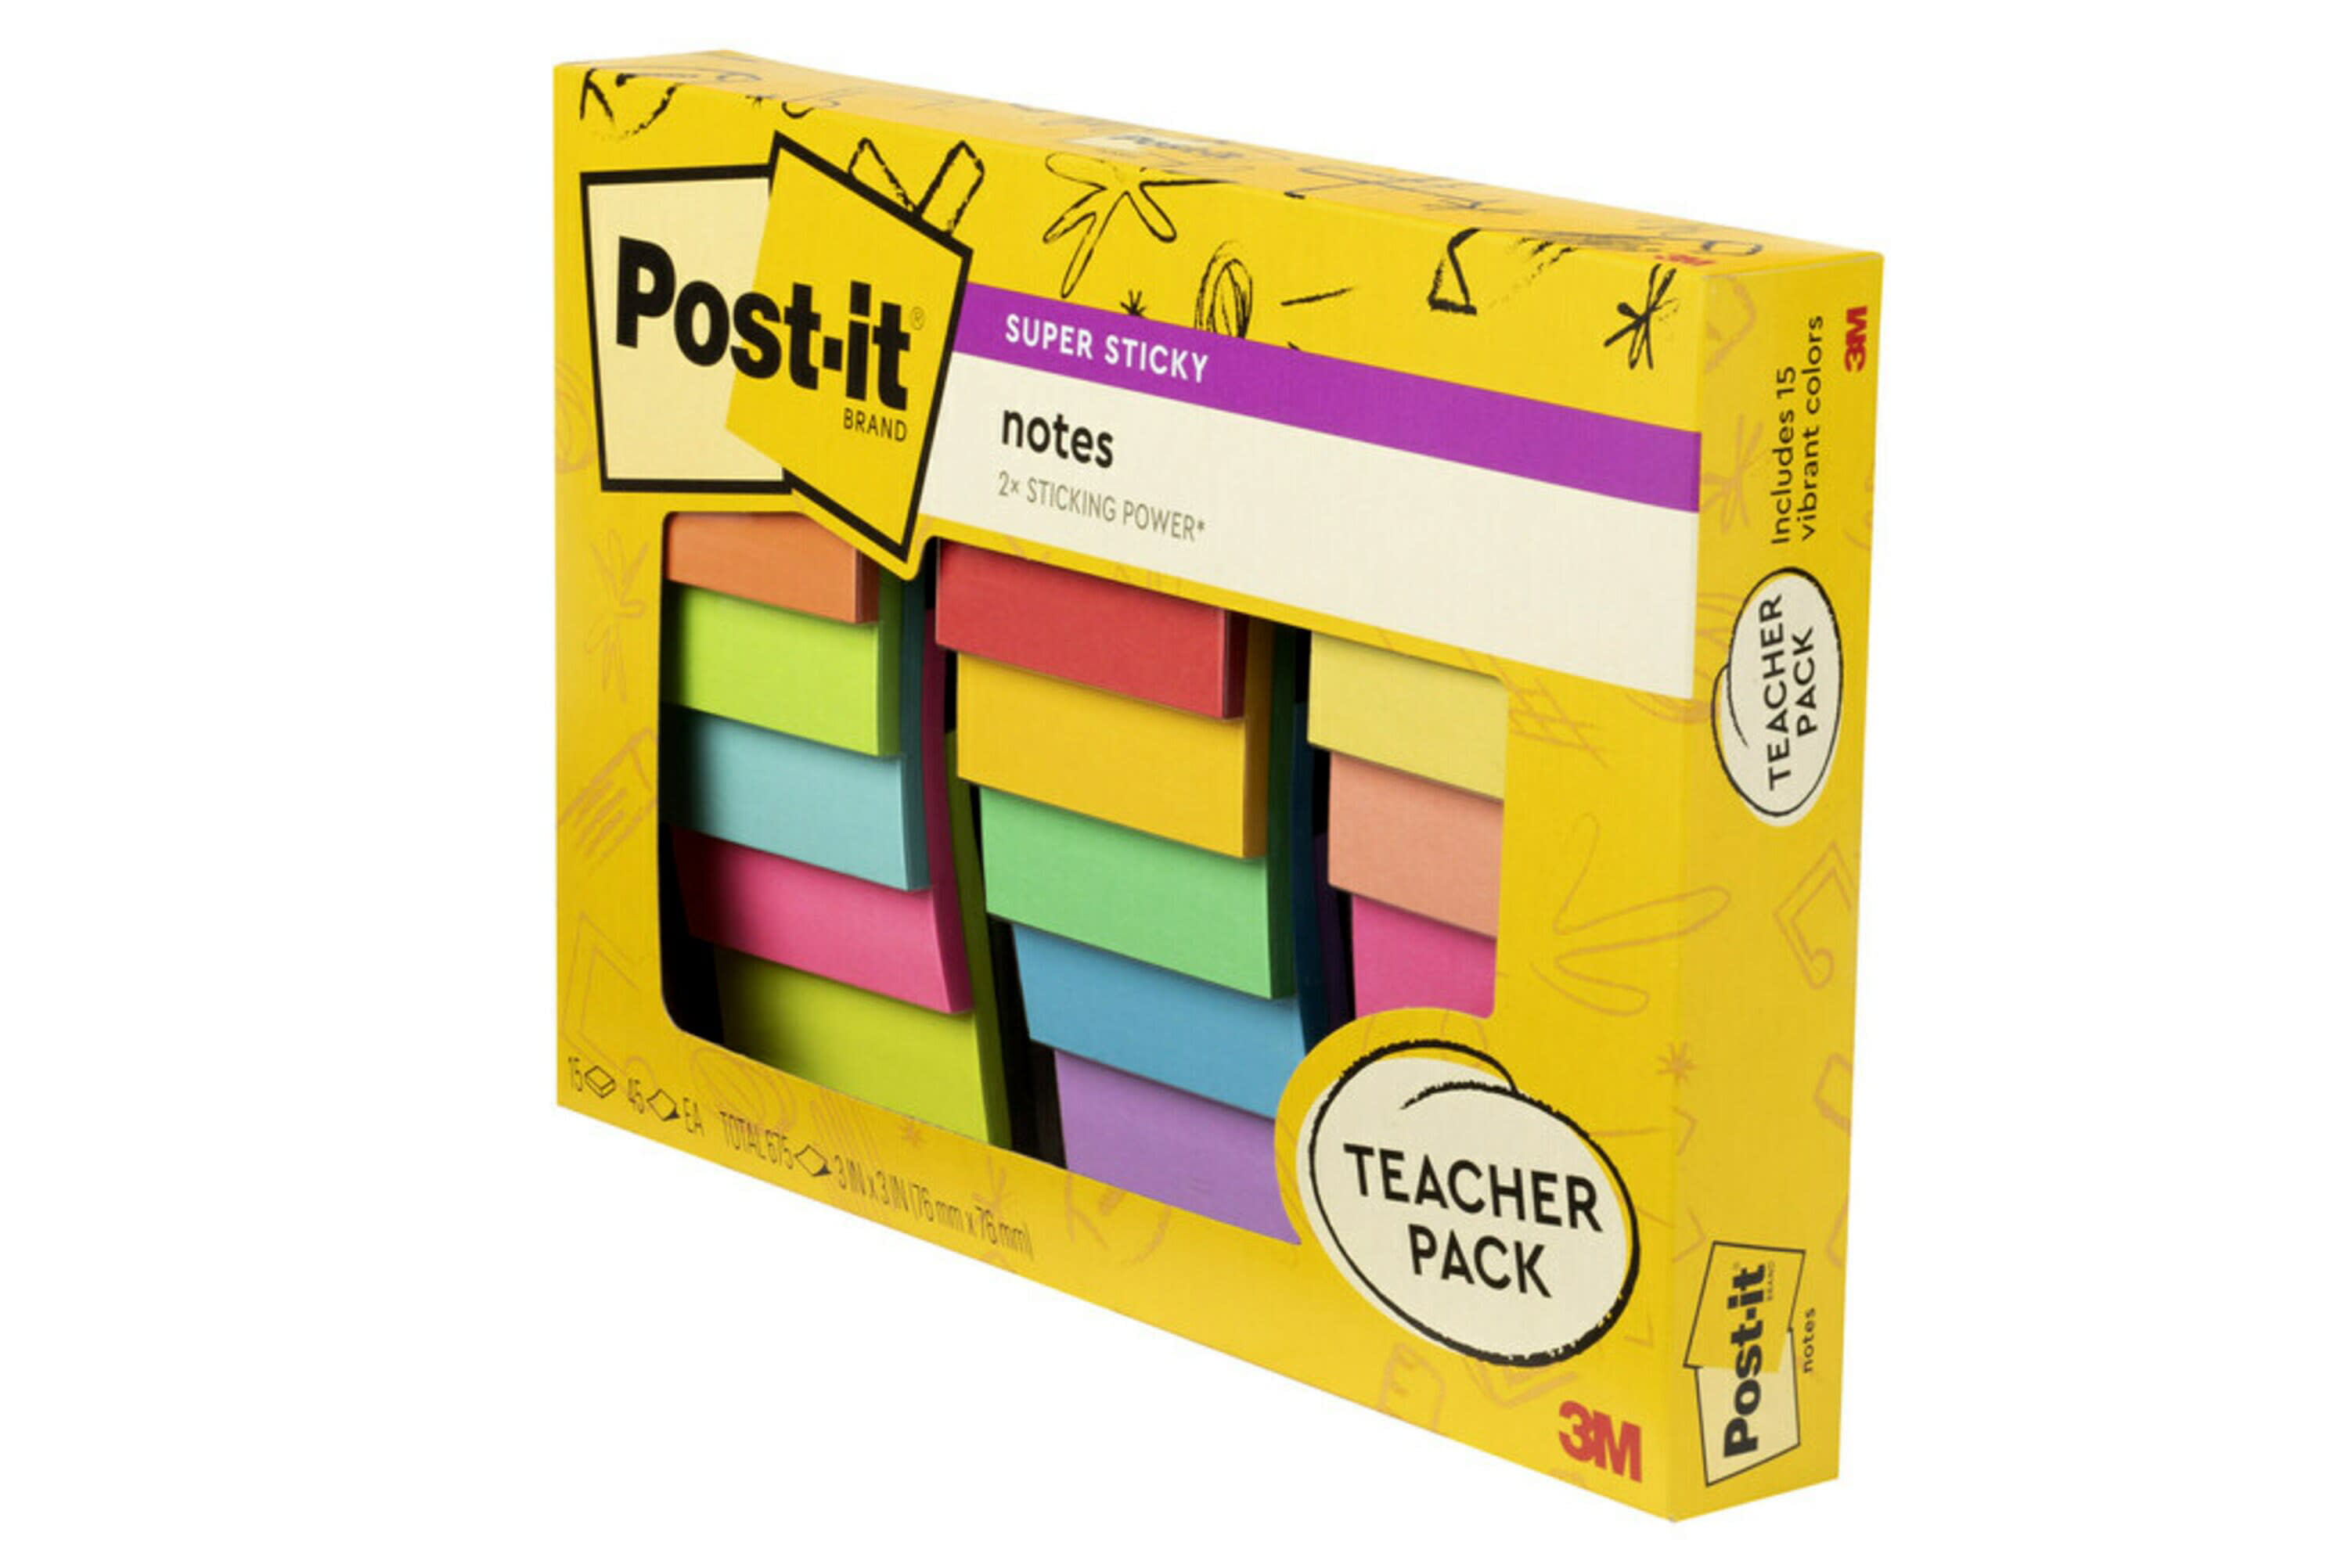 25 Sticky Note Teacher Hacks You'll Want to Steal  Sticky notes, Teacher  hacks, Sticky note activity